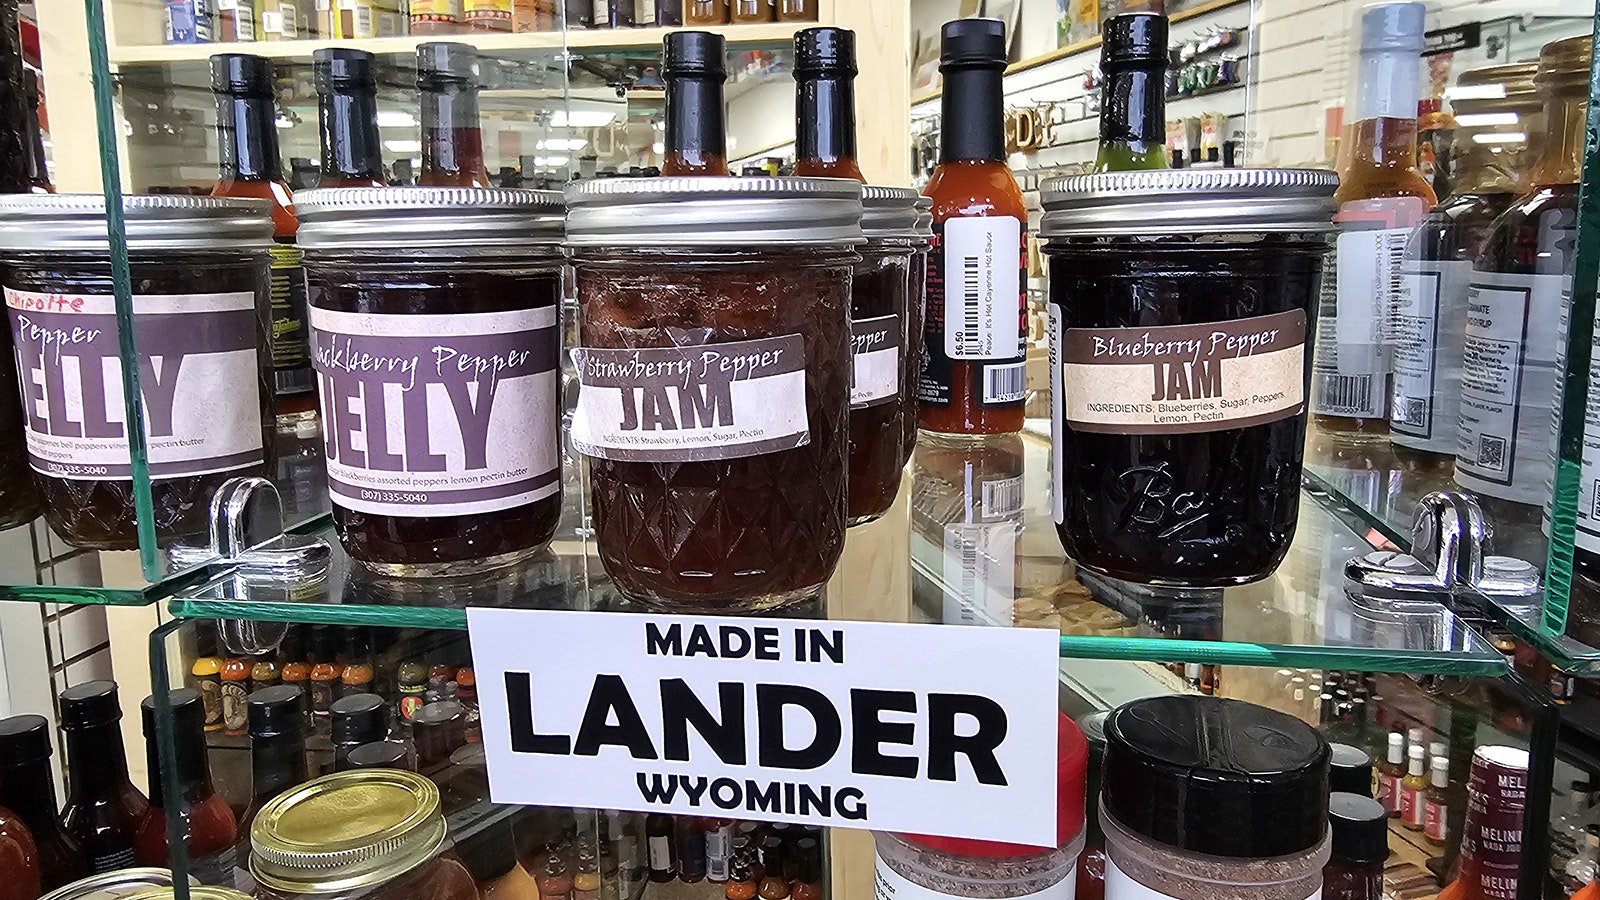 One section of the store is devoted to hot sauces and other hot food products made in Wyoming.